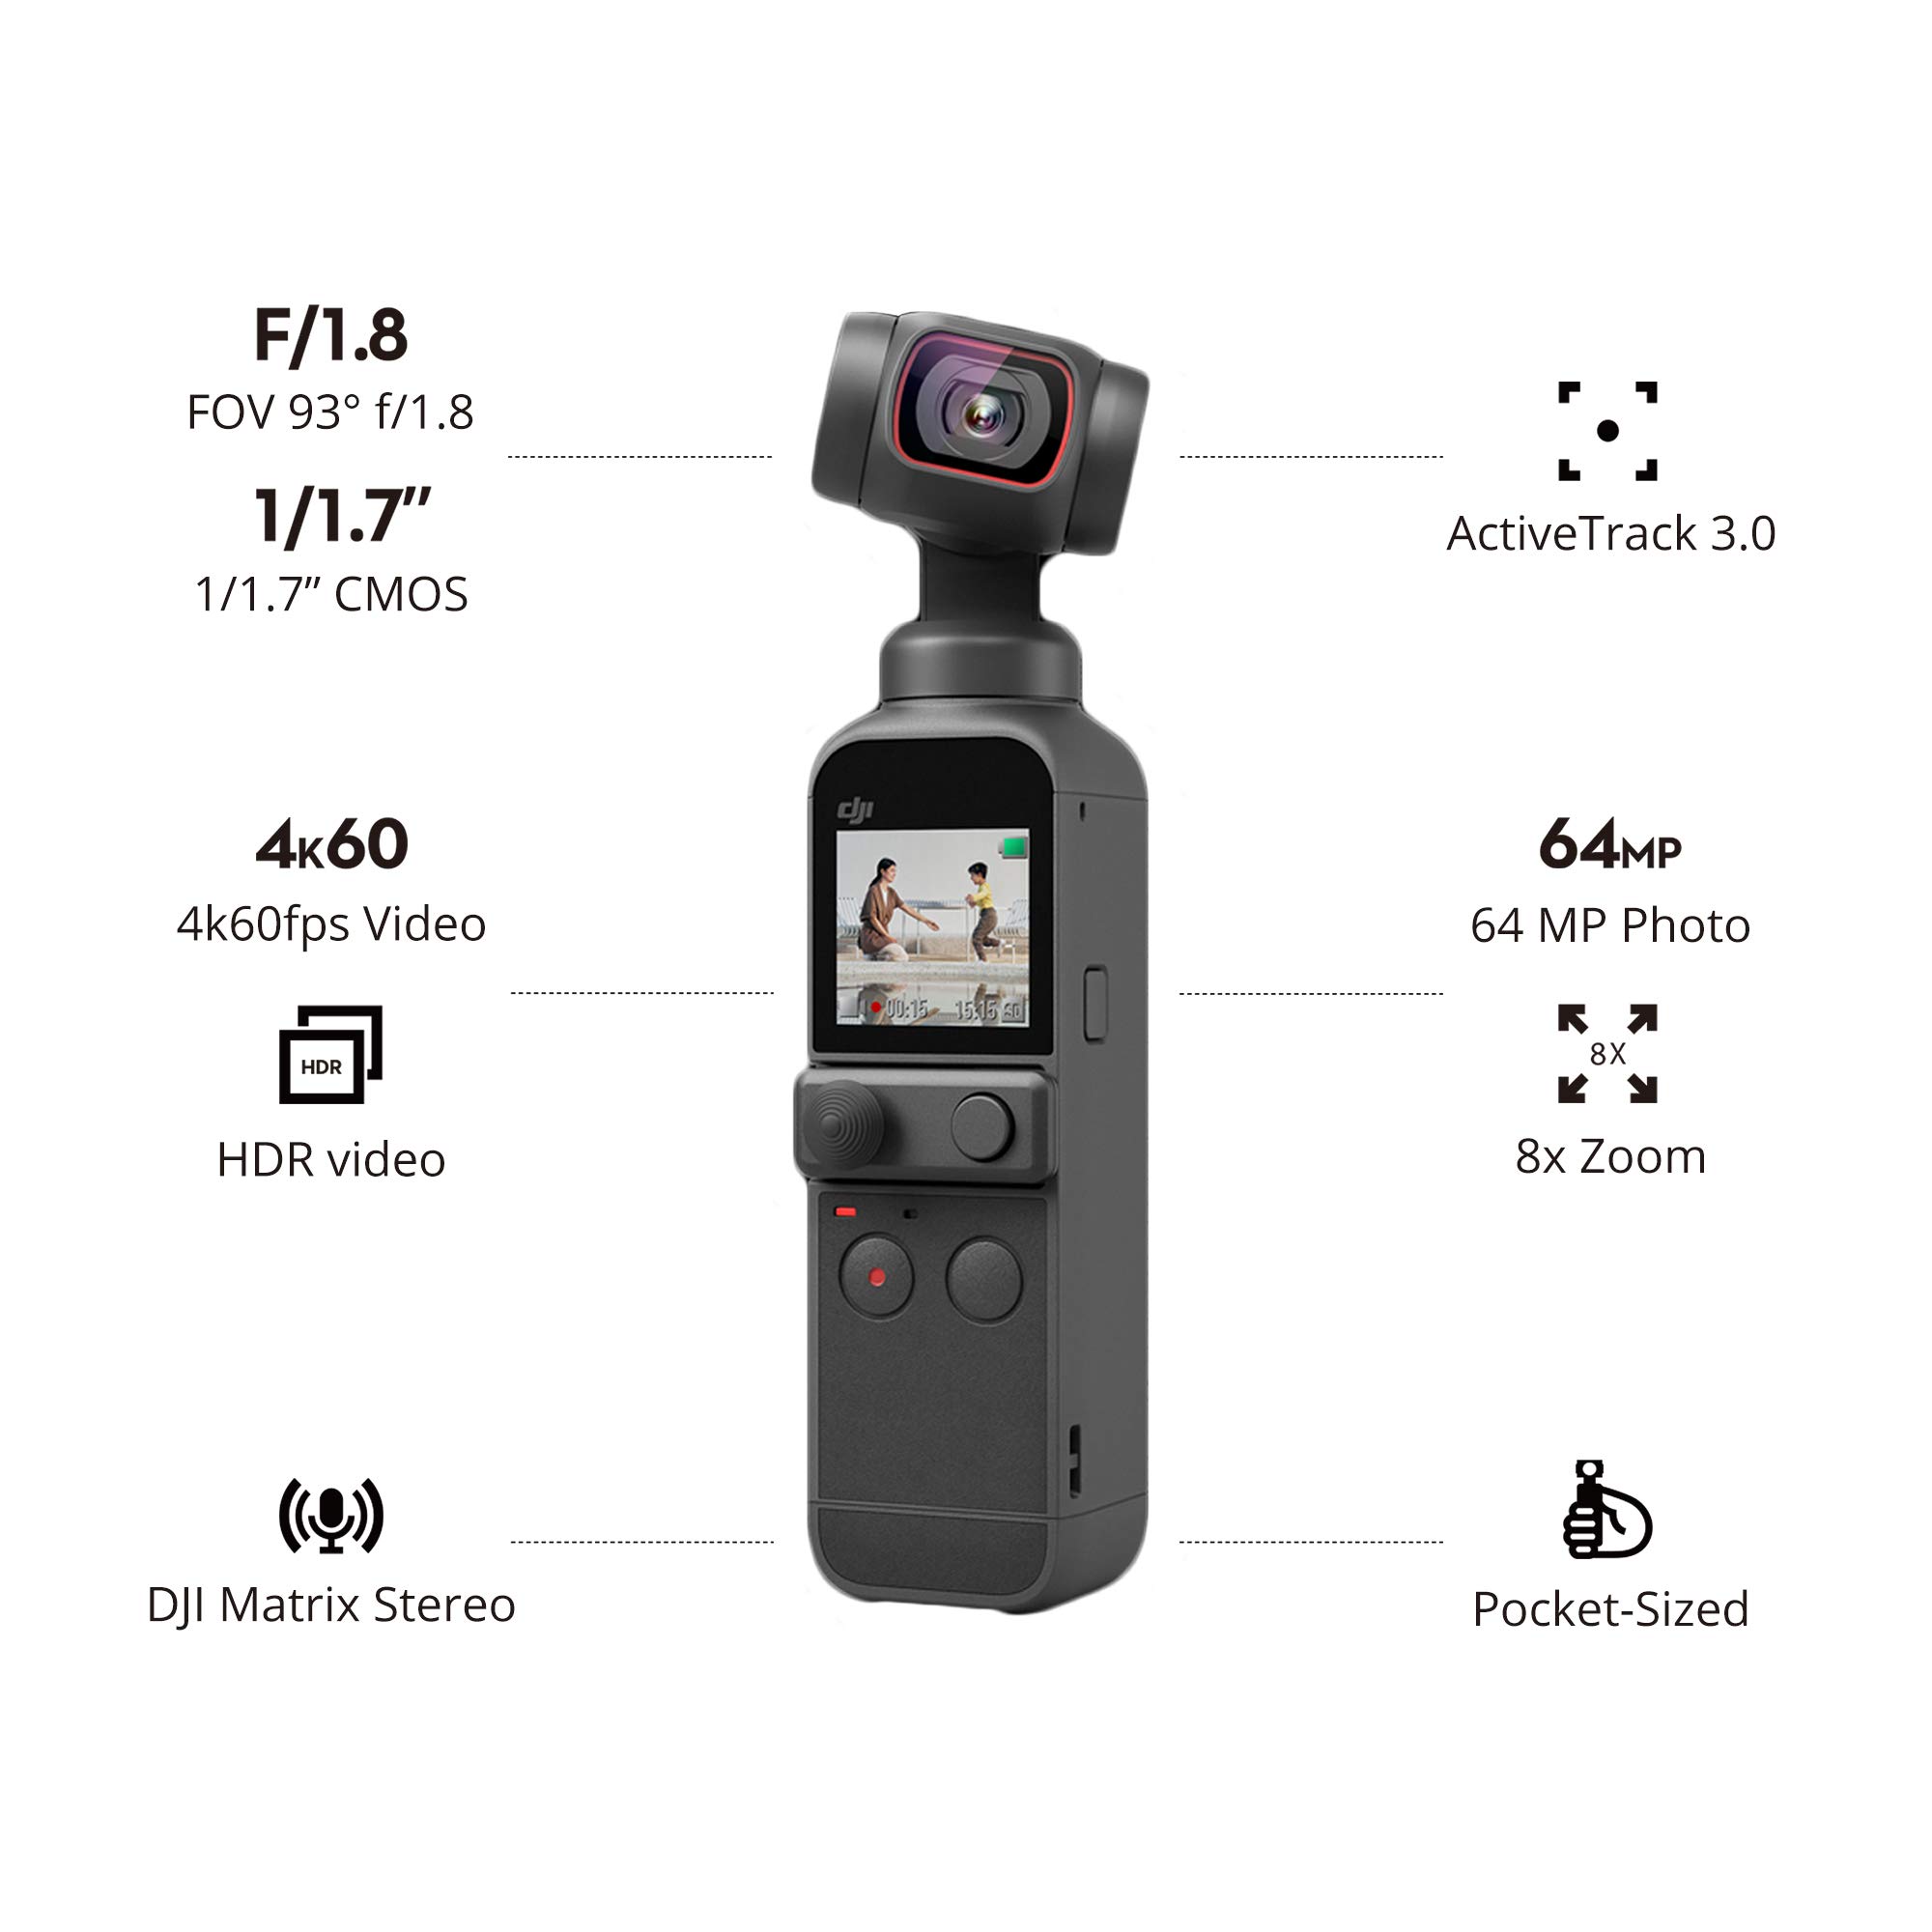 DJI Pocket 2 - Handheld 3-Axis Gimbal Stabilizer with 4K Camera, 1/1.7” CMOS, 64MP Photo, Pocket-Sized, ActiveTrack 3.0, Glamour Effects, YouTube TikTok Video Vlog, for Android and iPhone, Black